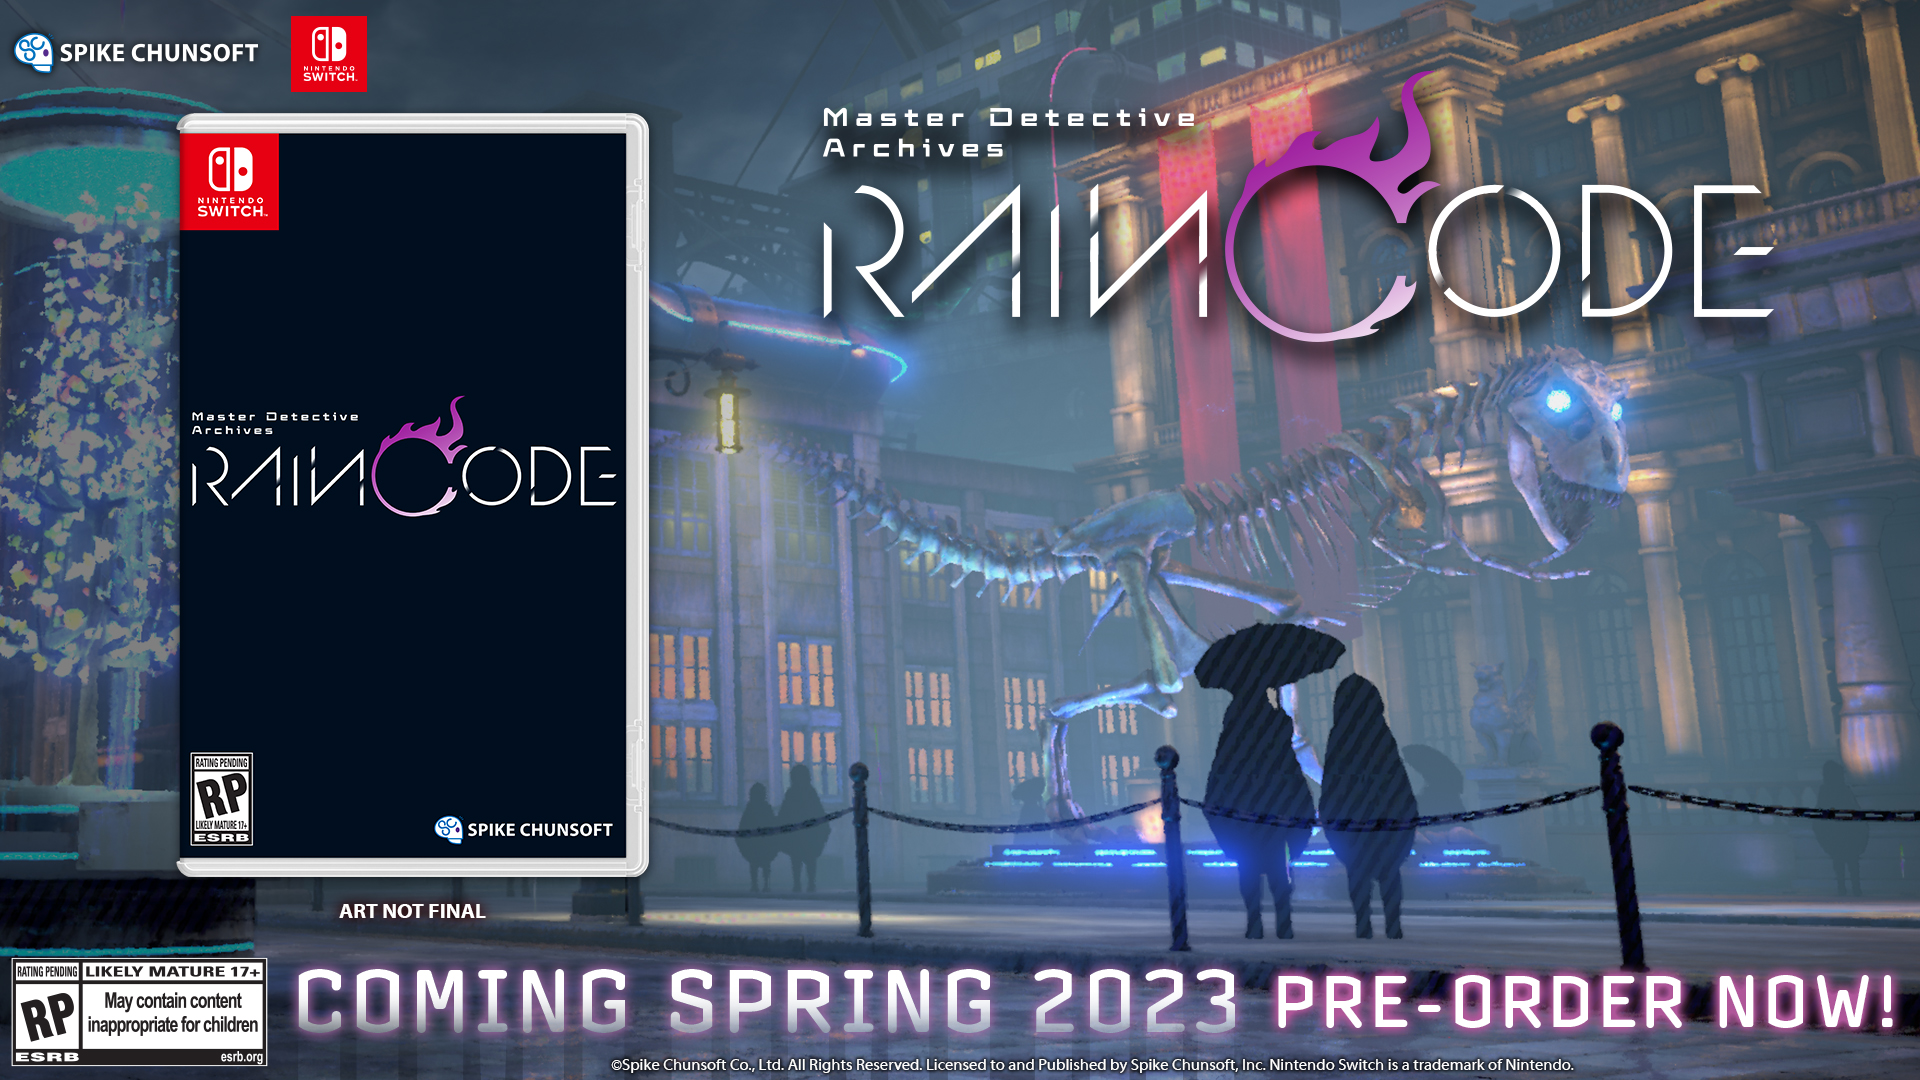 Revealed. Detective - Mysteriful Nintendo Open Limited Switch™ Master CODE RAIN Today. Edition Archives: Chunsoft Details Pre-Orders Spike for